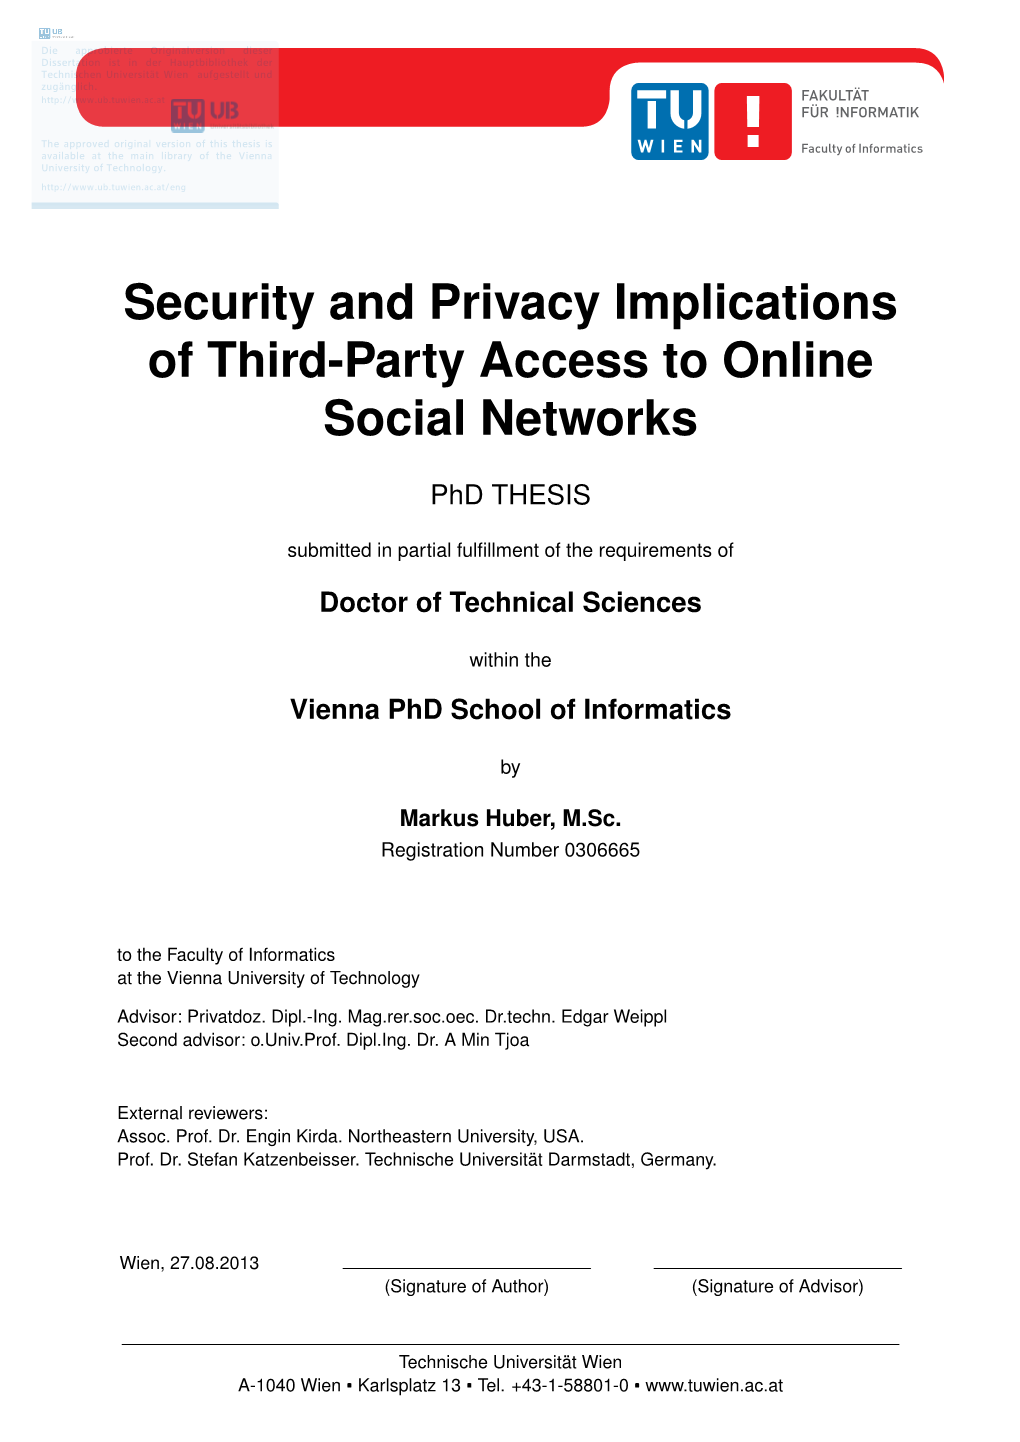 Security and Privacy Implications of Third-Party Access to Online Social Networks